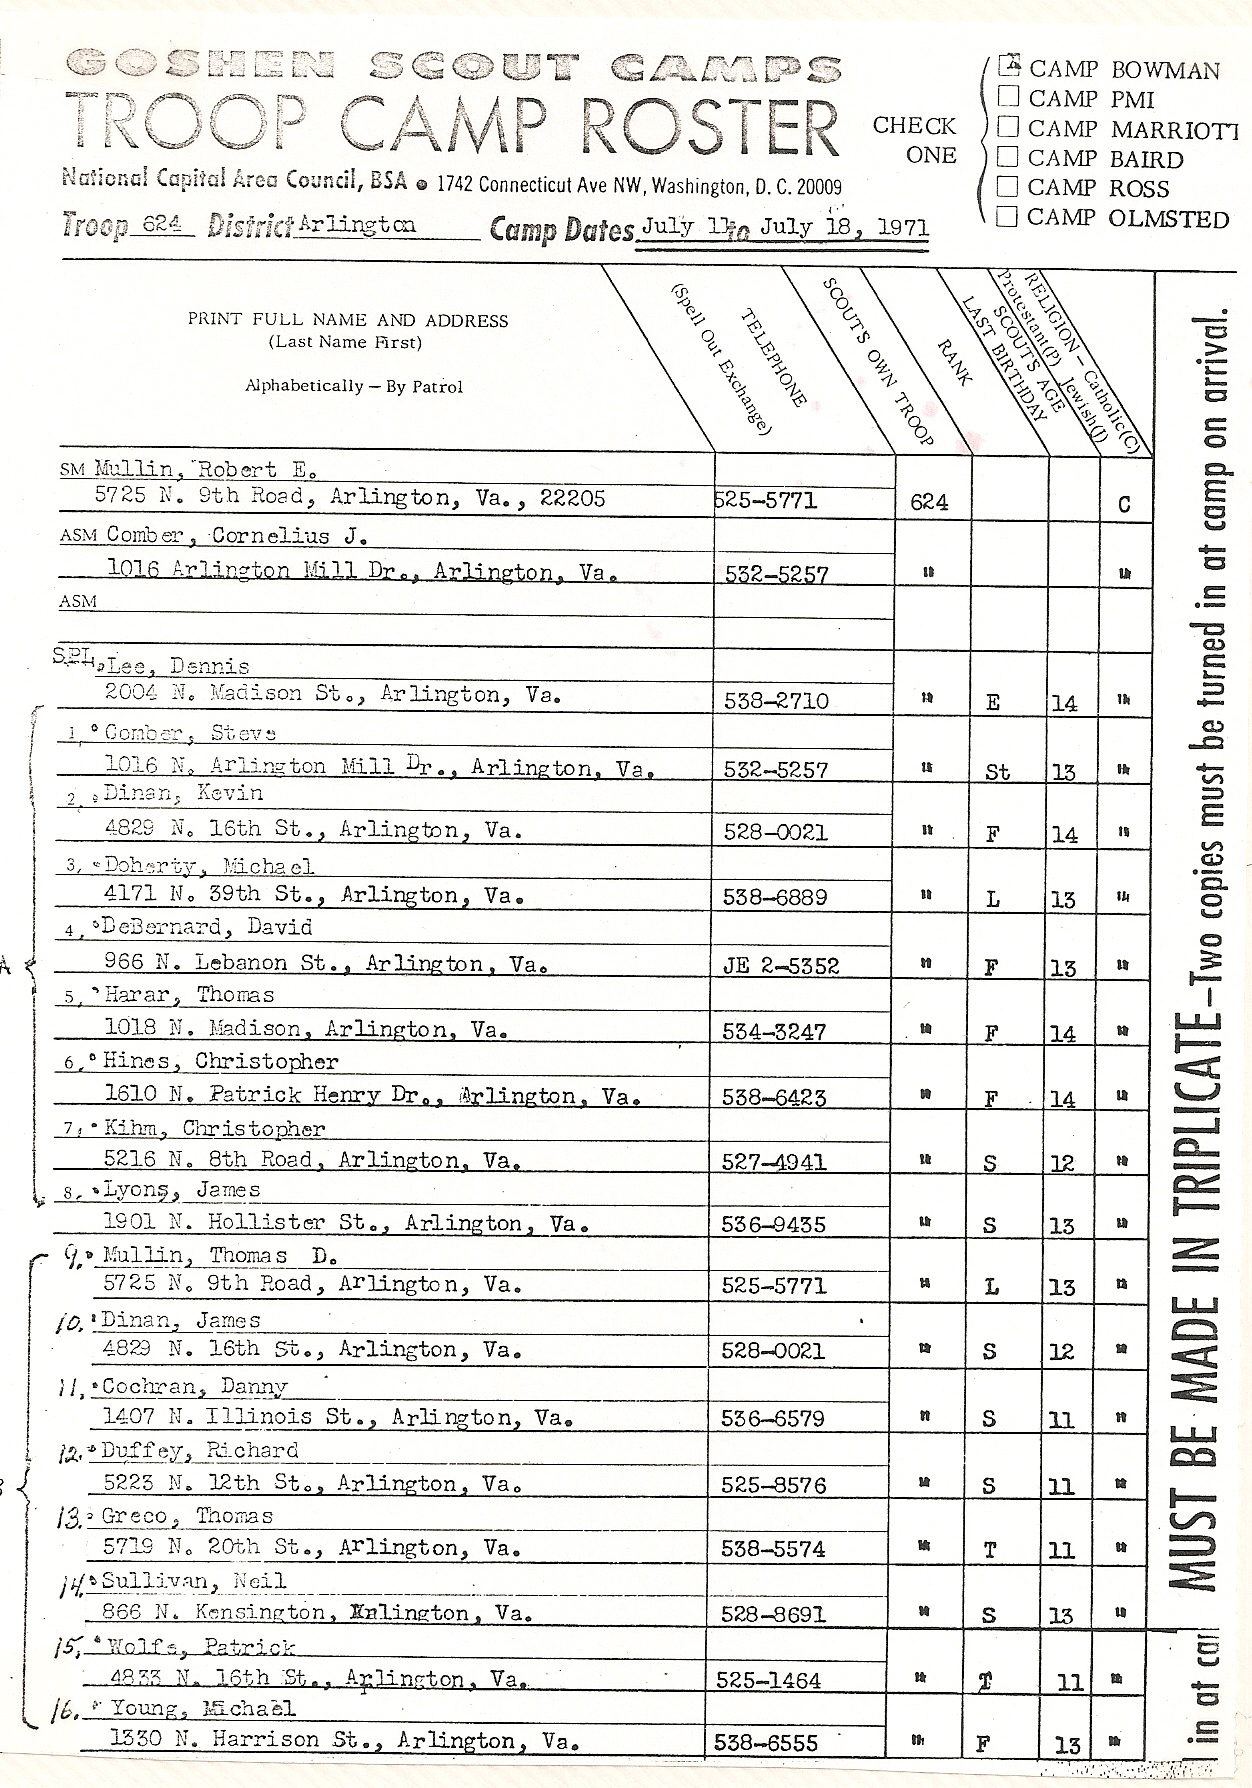 1971 Camp Roster